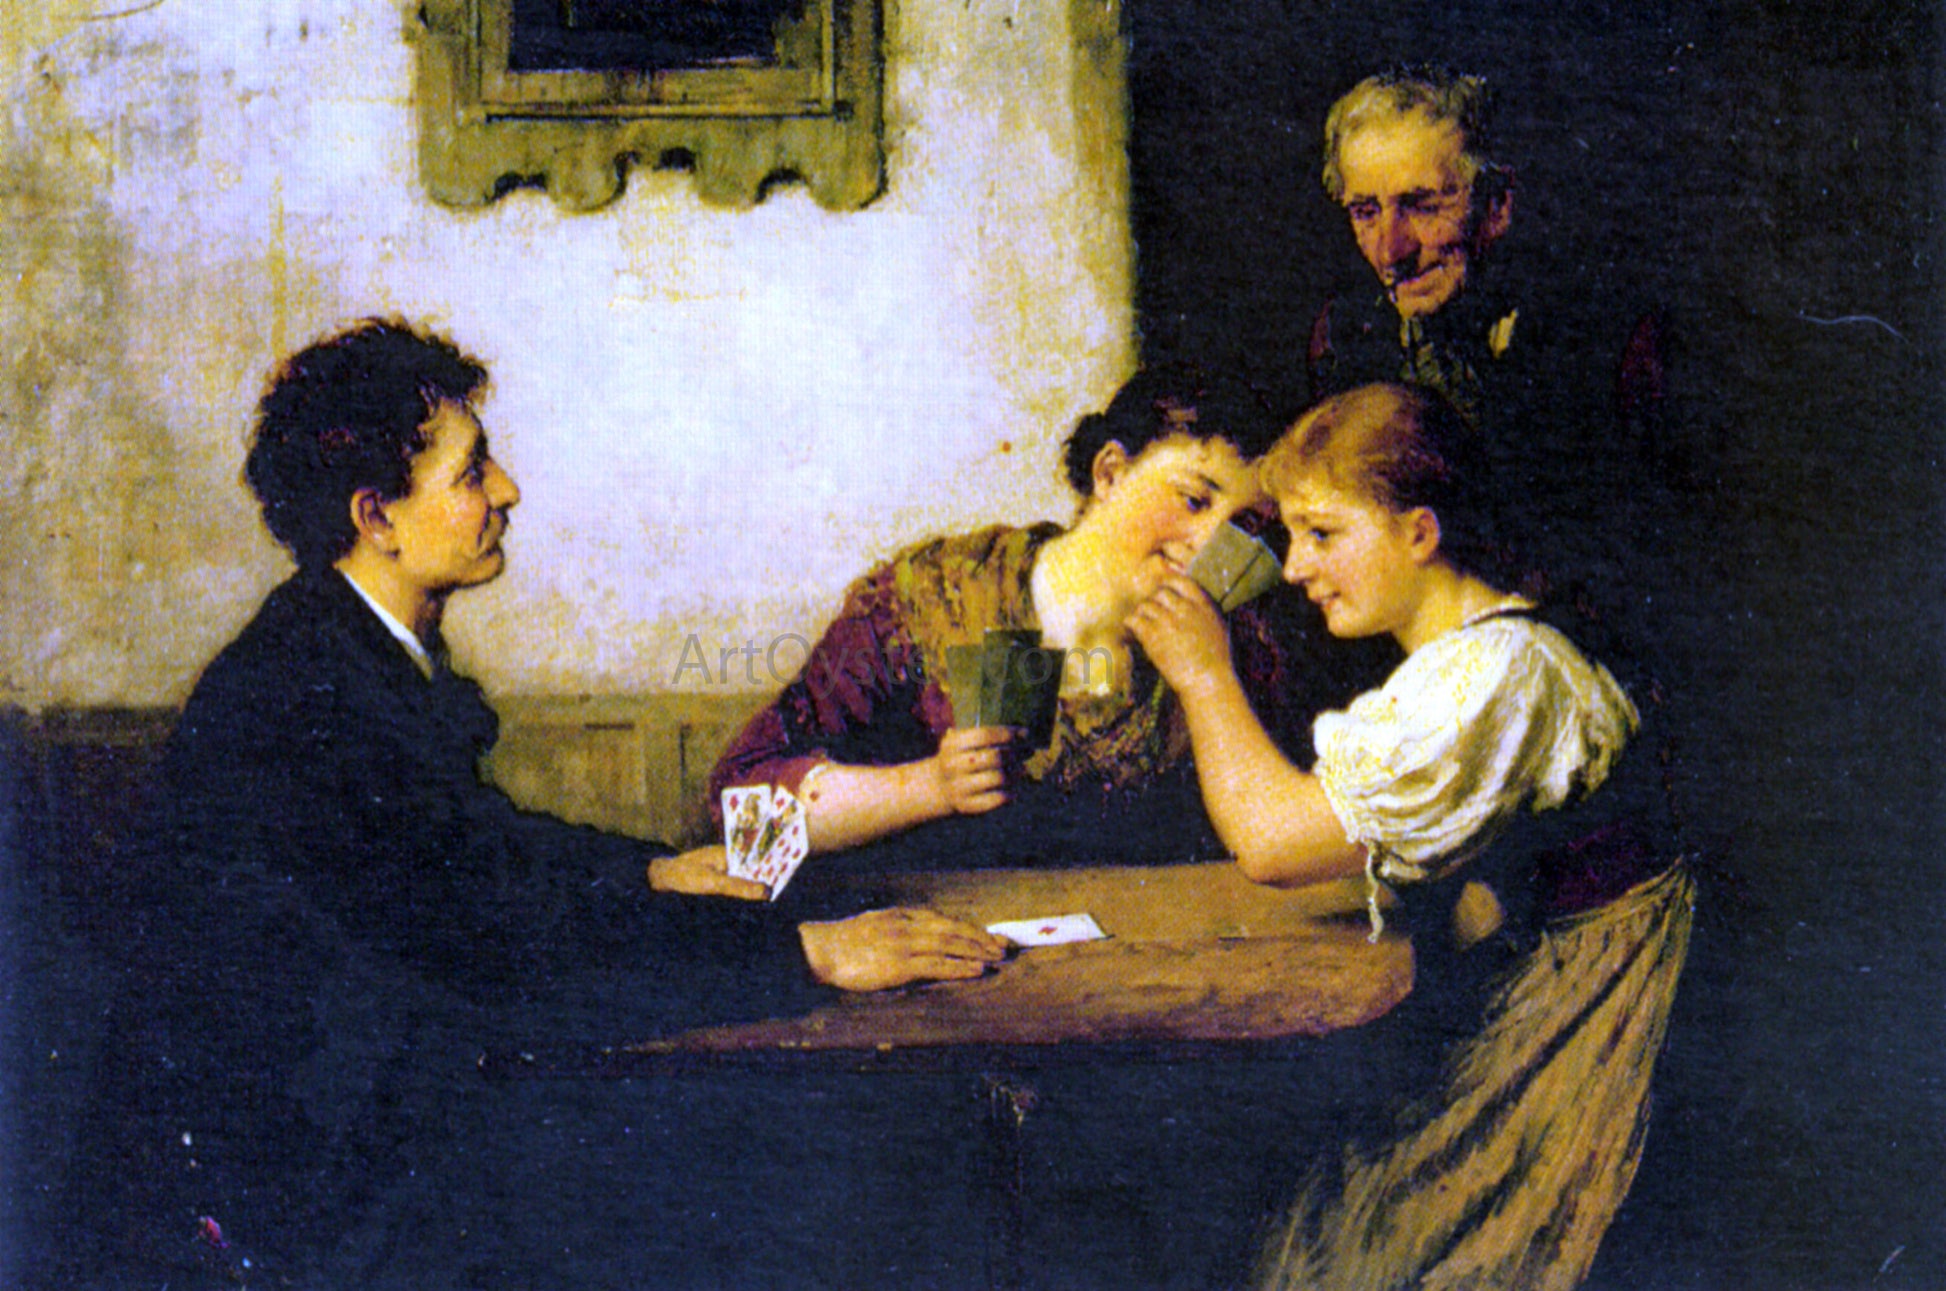  Hugo Oehmichen The Card Game - Hand Painted Oil Painting